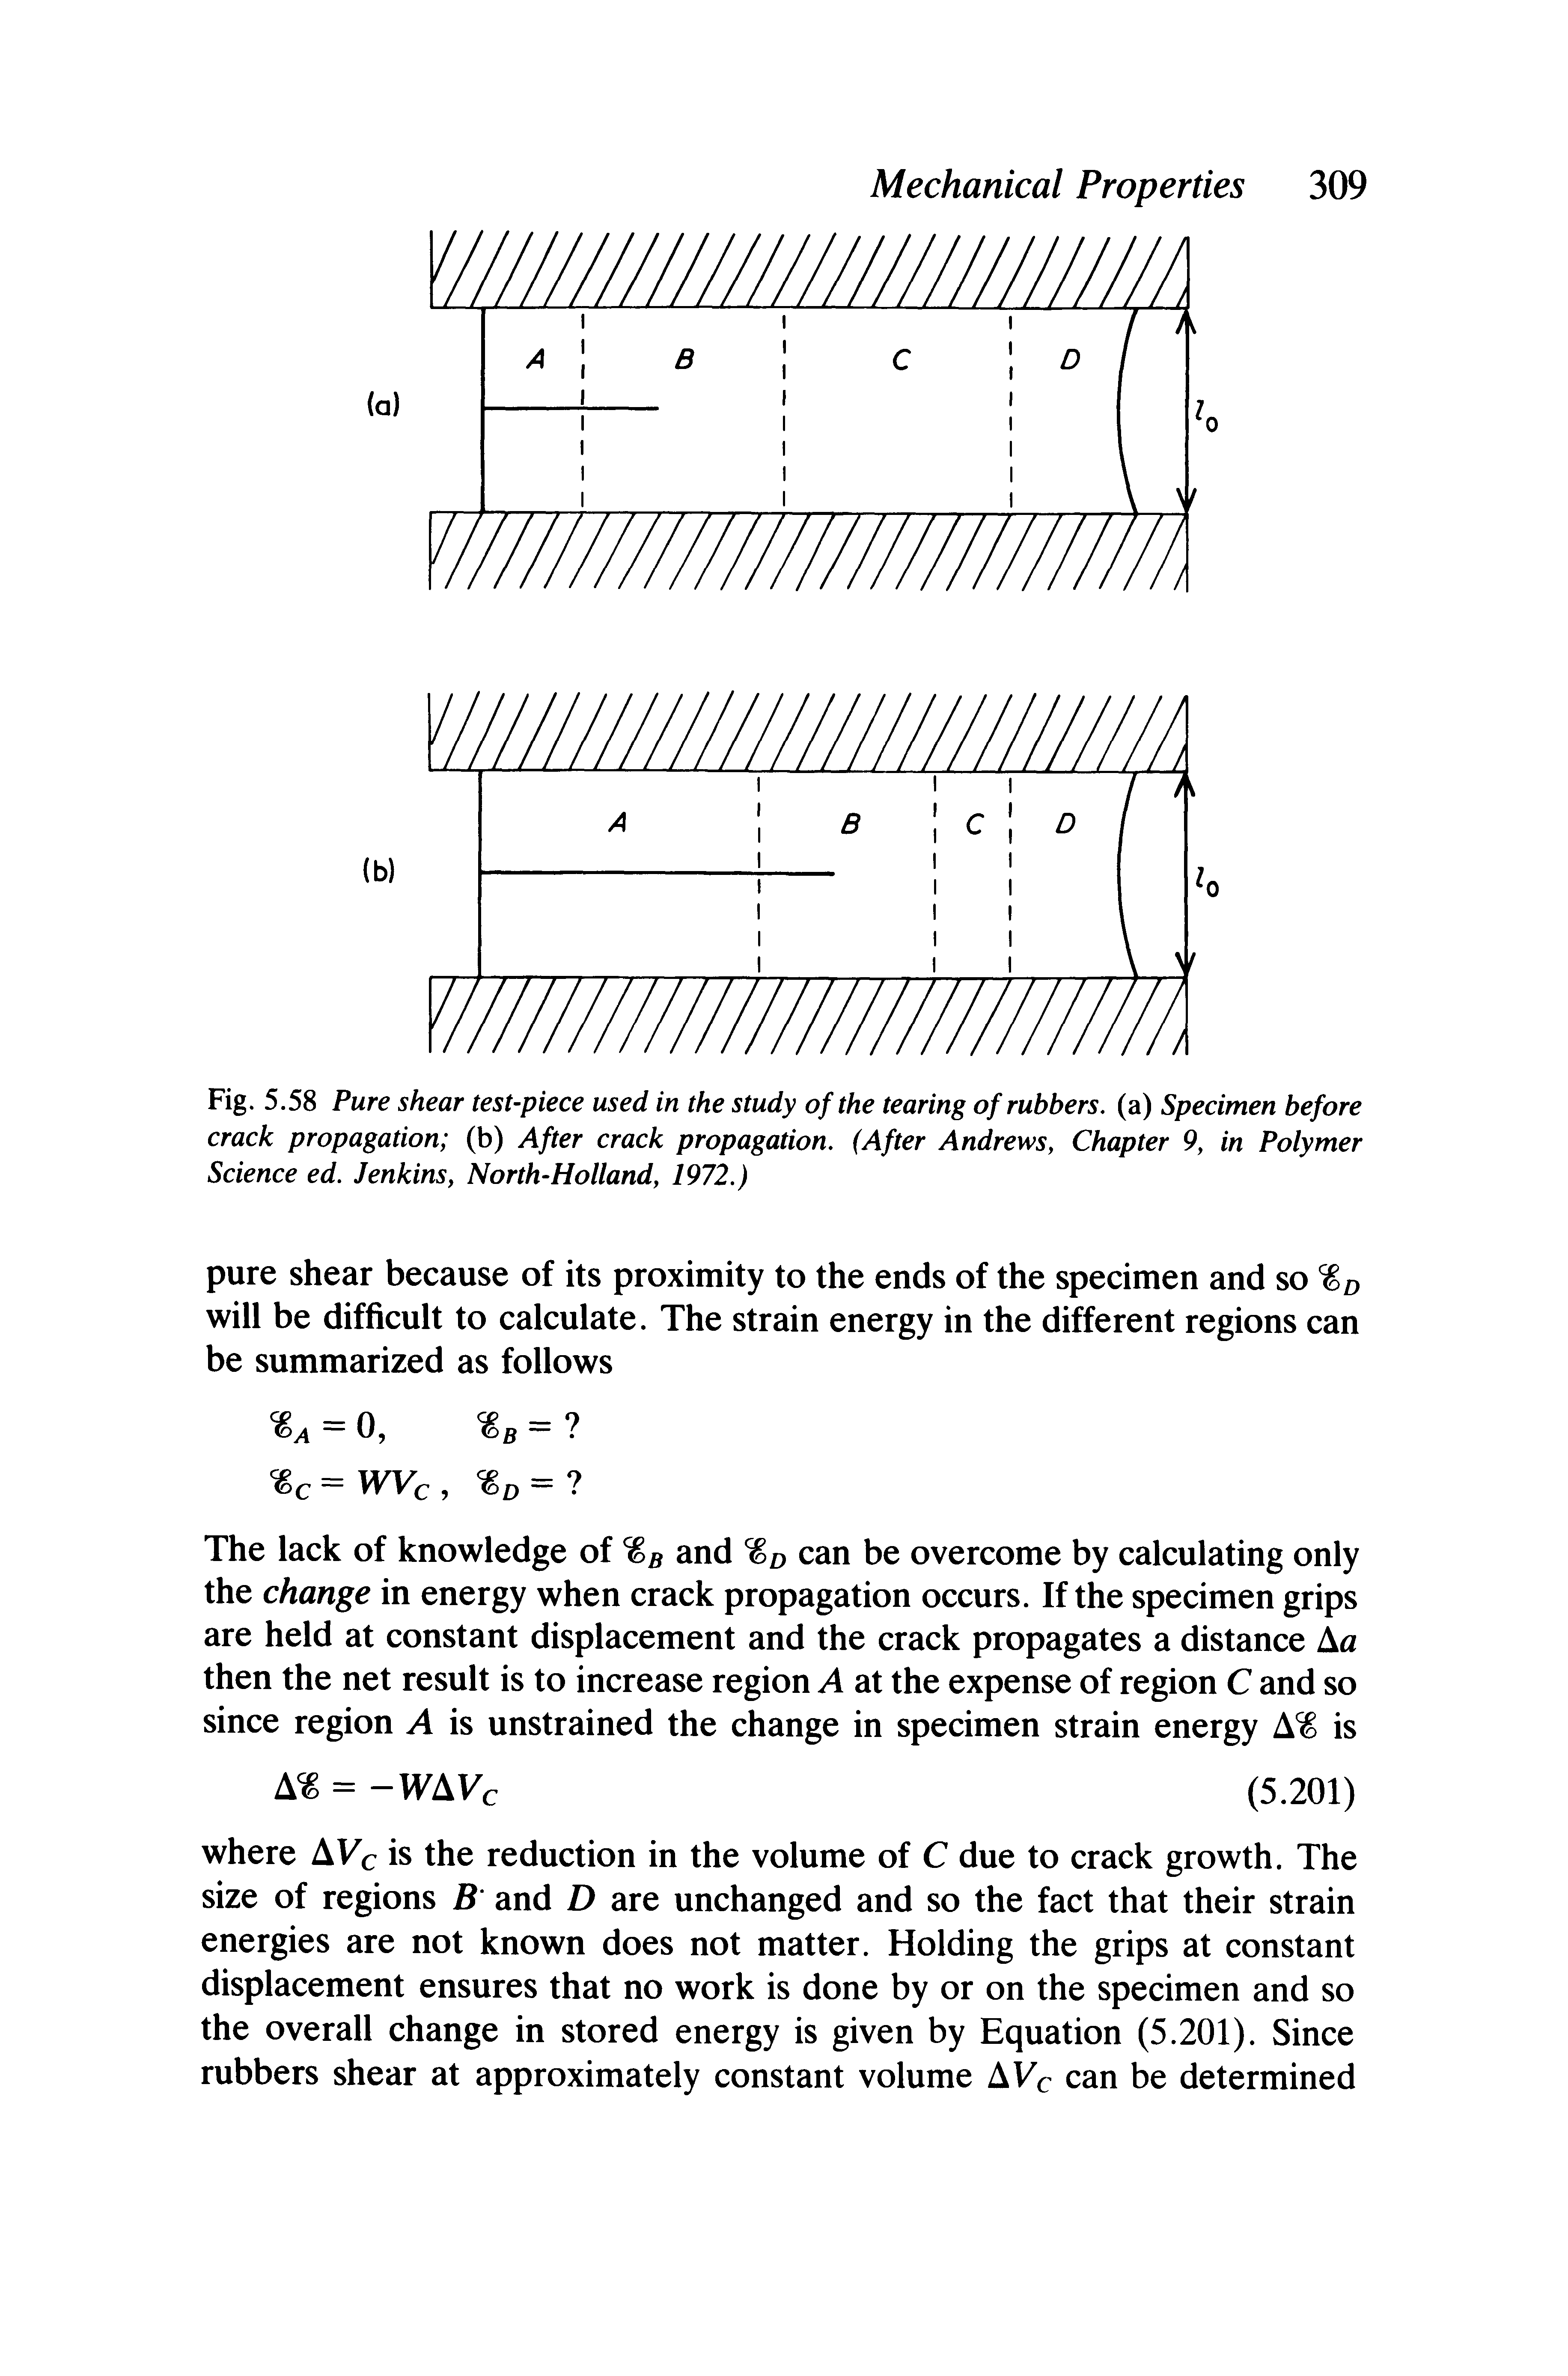 Fig. 5.58 Pure shear test-piece used in the study of the tearing of rubbers, (a) Specimen before crack propagation (b) After crack propagation. (After Andrews, Chapter 9, in Polymer Science ed. Jenkins, North-Holland, 1972.)...